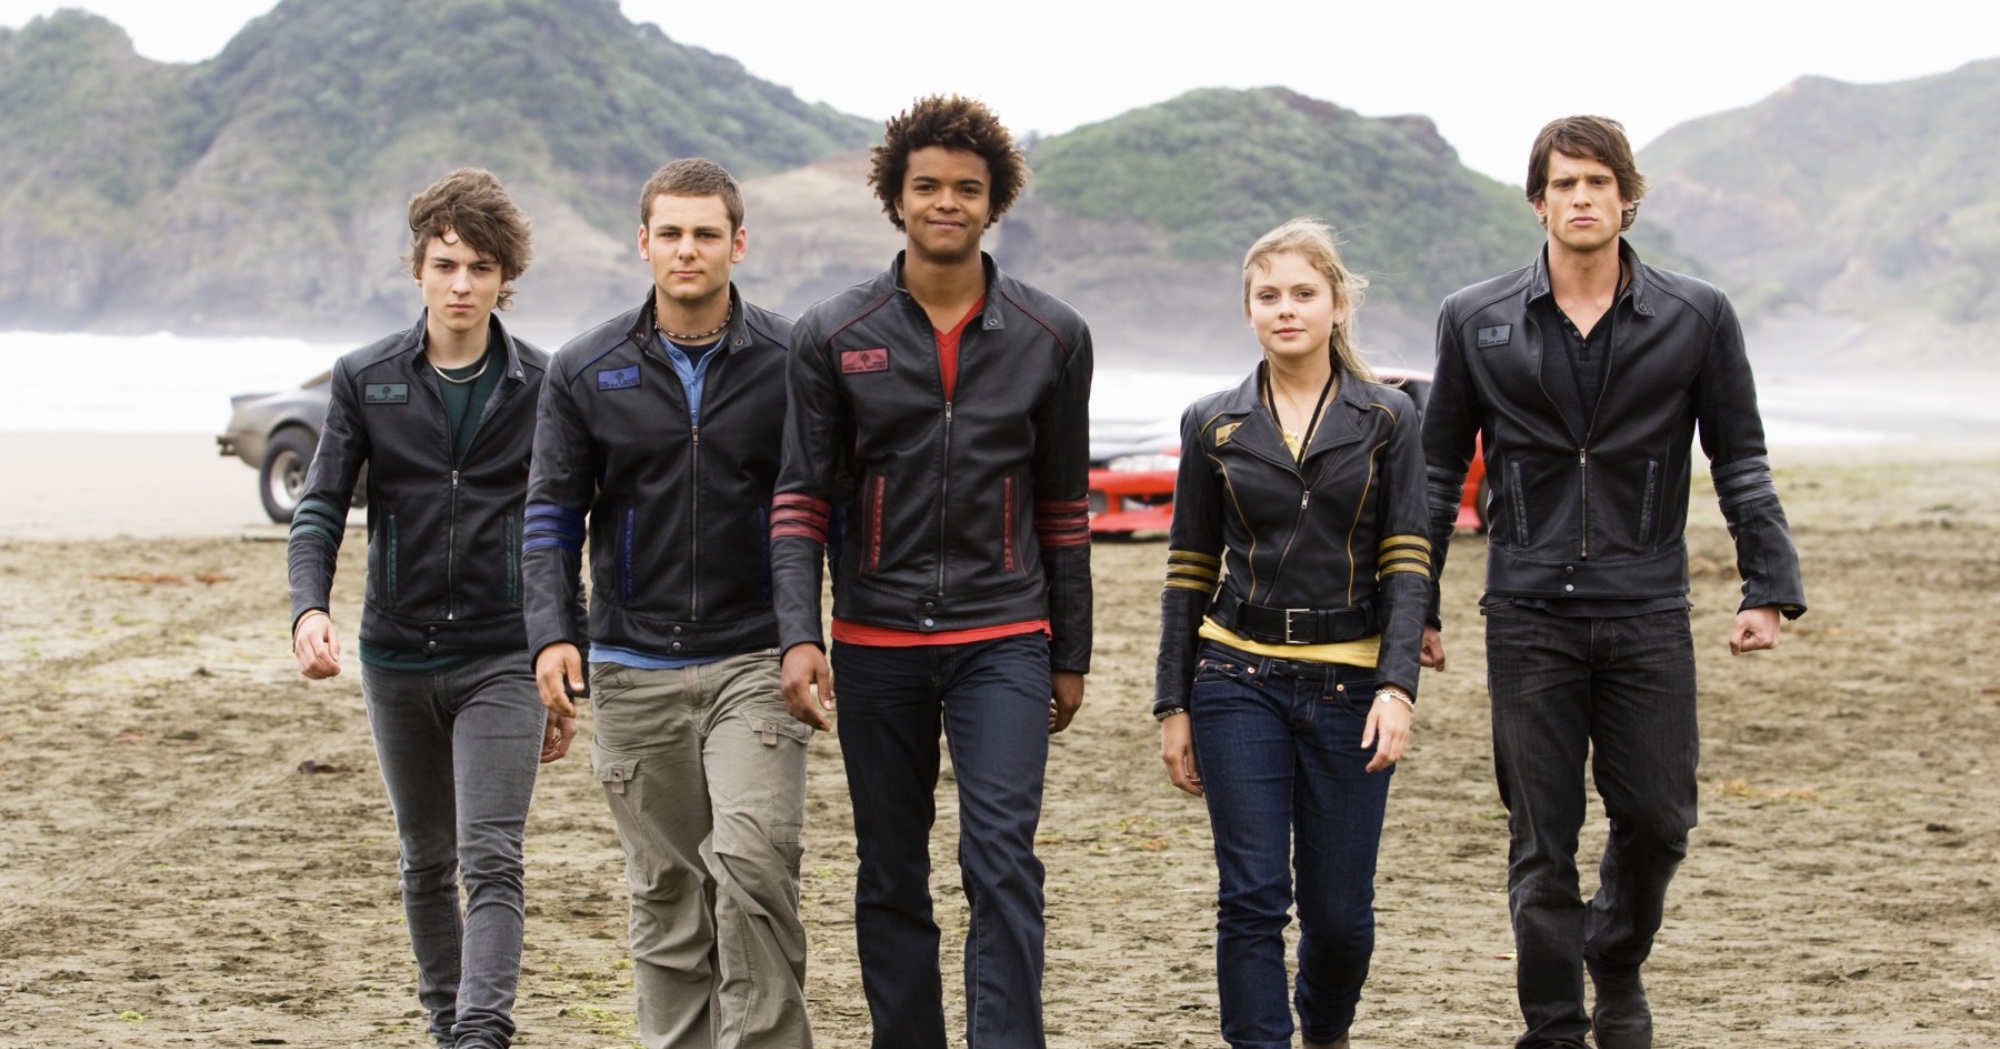 Cast members and Rose McIver for 'Power Rangers RPM' wearing team jackets